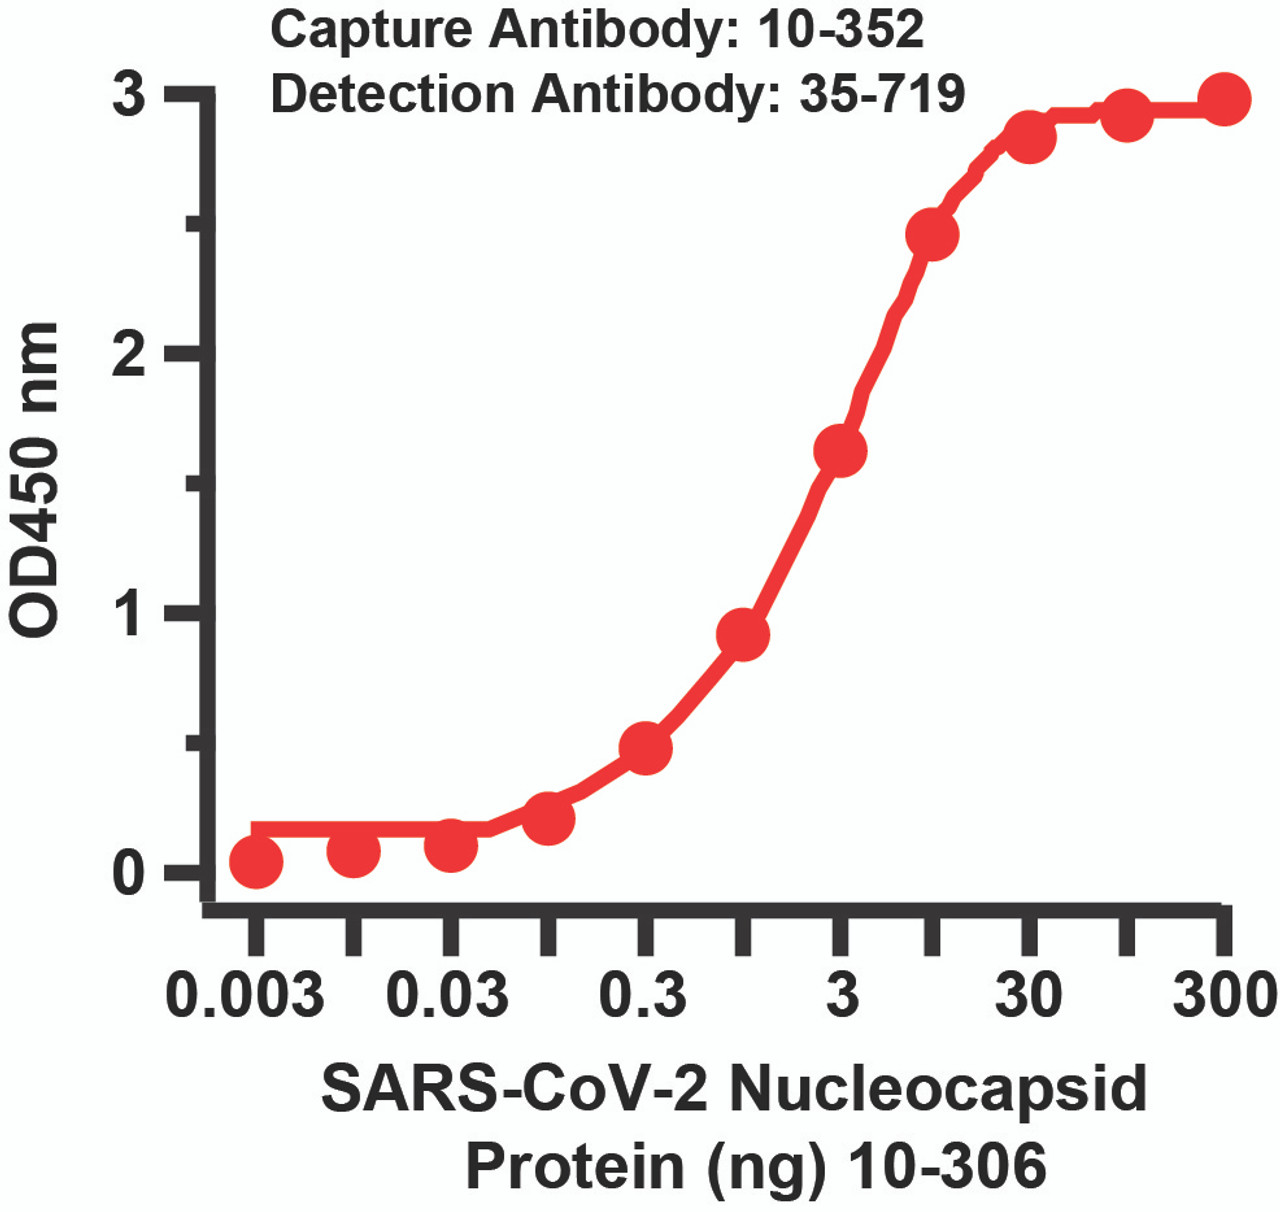 <strong>Figure 2 Sandwich ELISA for SARS-CoV-2 (COVID-19) Matched Pair Nucleocapsid Antibodies</strong><br>
Antibodies: SARS-CoV-2 (COVID-19) Nucleocapsid Antibodies, 10-352 and 35-719. A sandwich ELISA was performed using SARS-CoV-2 Nucleocapsid antibody (10-352, 5ug/ml) as capture antibody, the Nucleocapsid recombinant protein as the binding protein (10-306) , and the anti-SARS-CoV-2 Nucleocapsid antibody (35-719, 1ug/ml) as the detection antibody. Secondary: Goat anti-mouse IgG HRP conjugate at 1:20000 dilution. Detection range is from 0.03 ng to 300 ng. EC50 = 2.5 ng